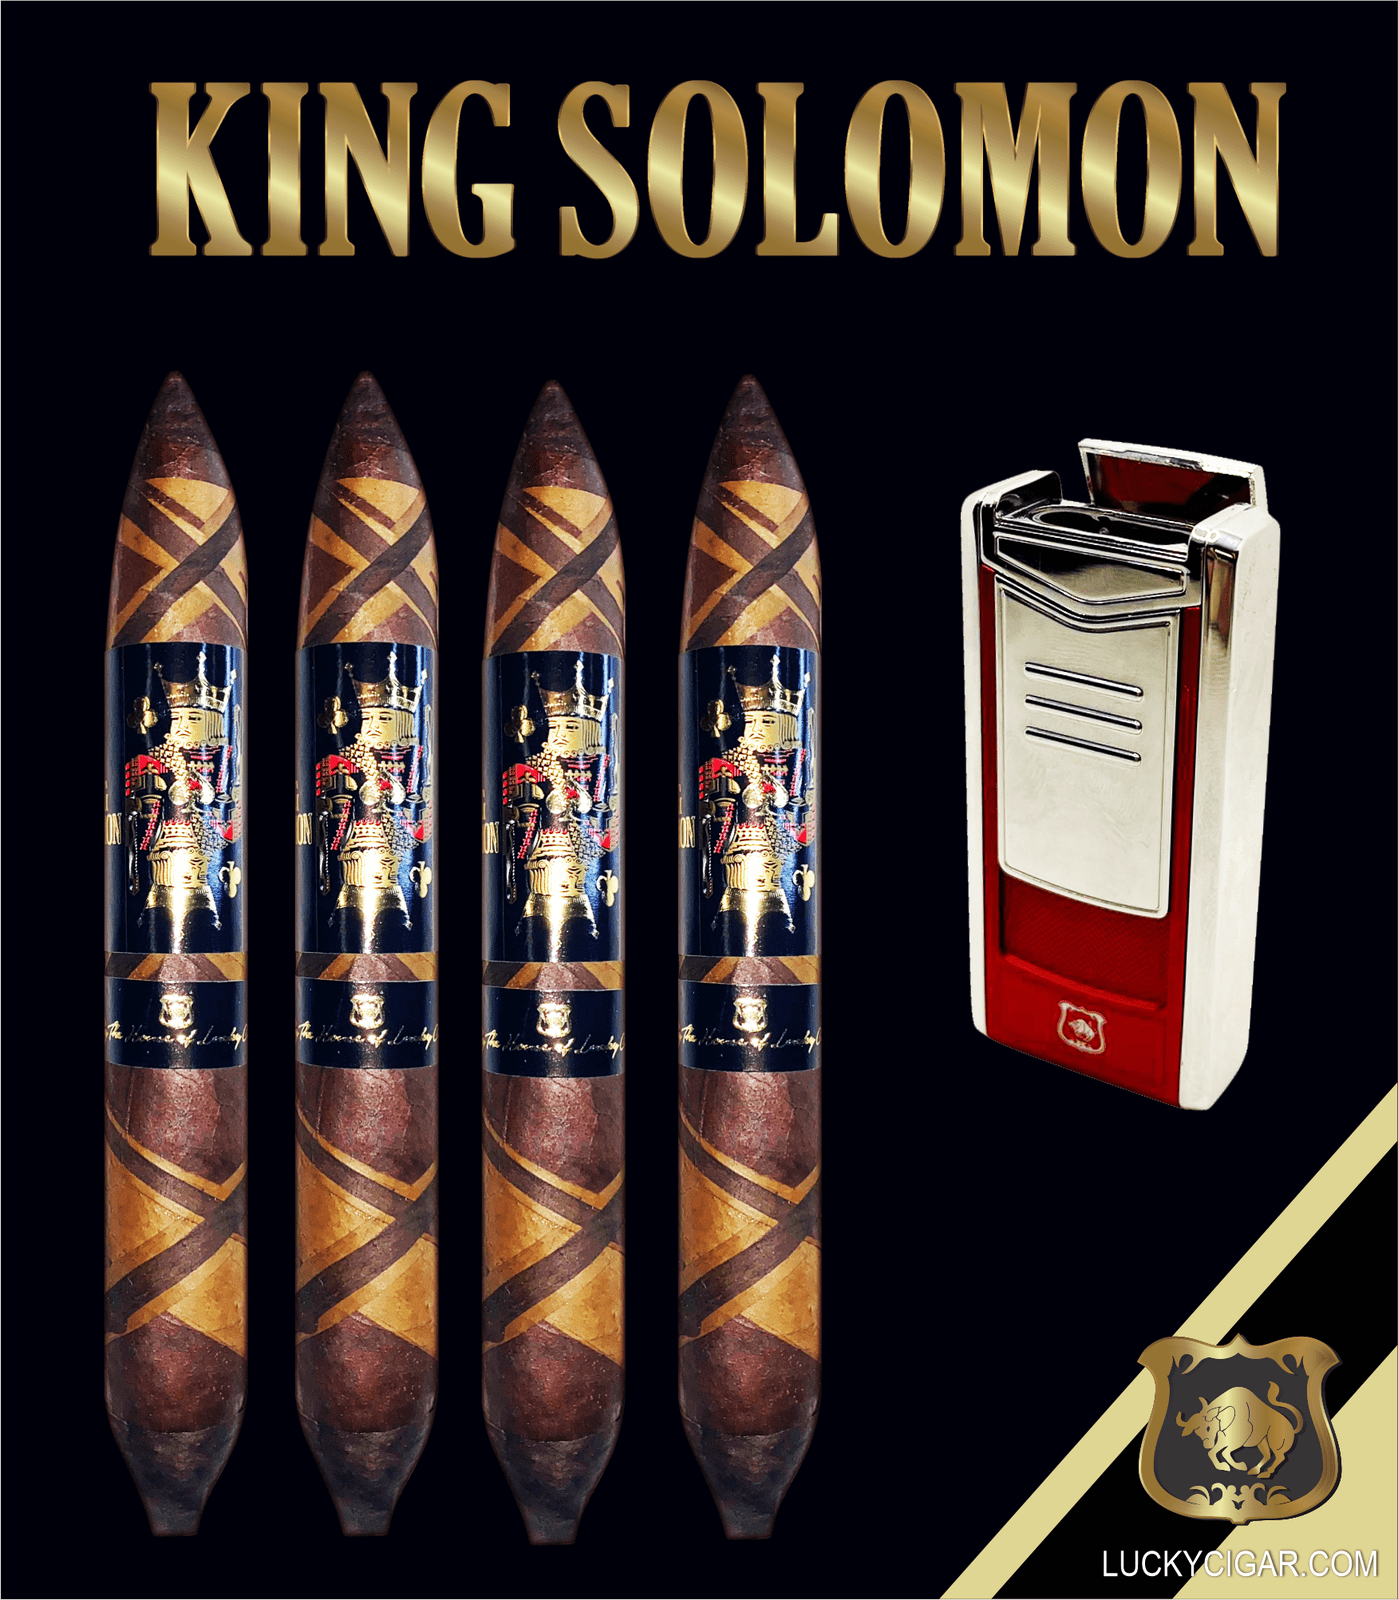 From The King Solomon Series: 4 Solomon 7x60 Cigars with Torch Lighter